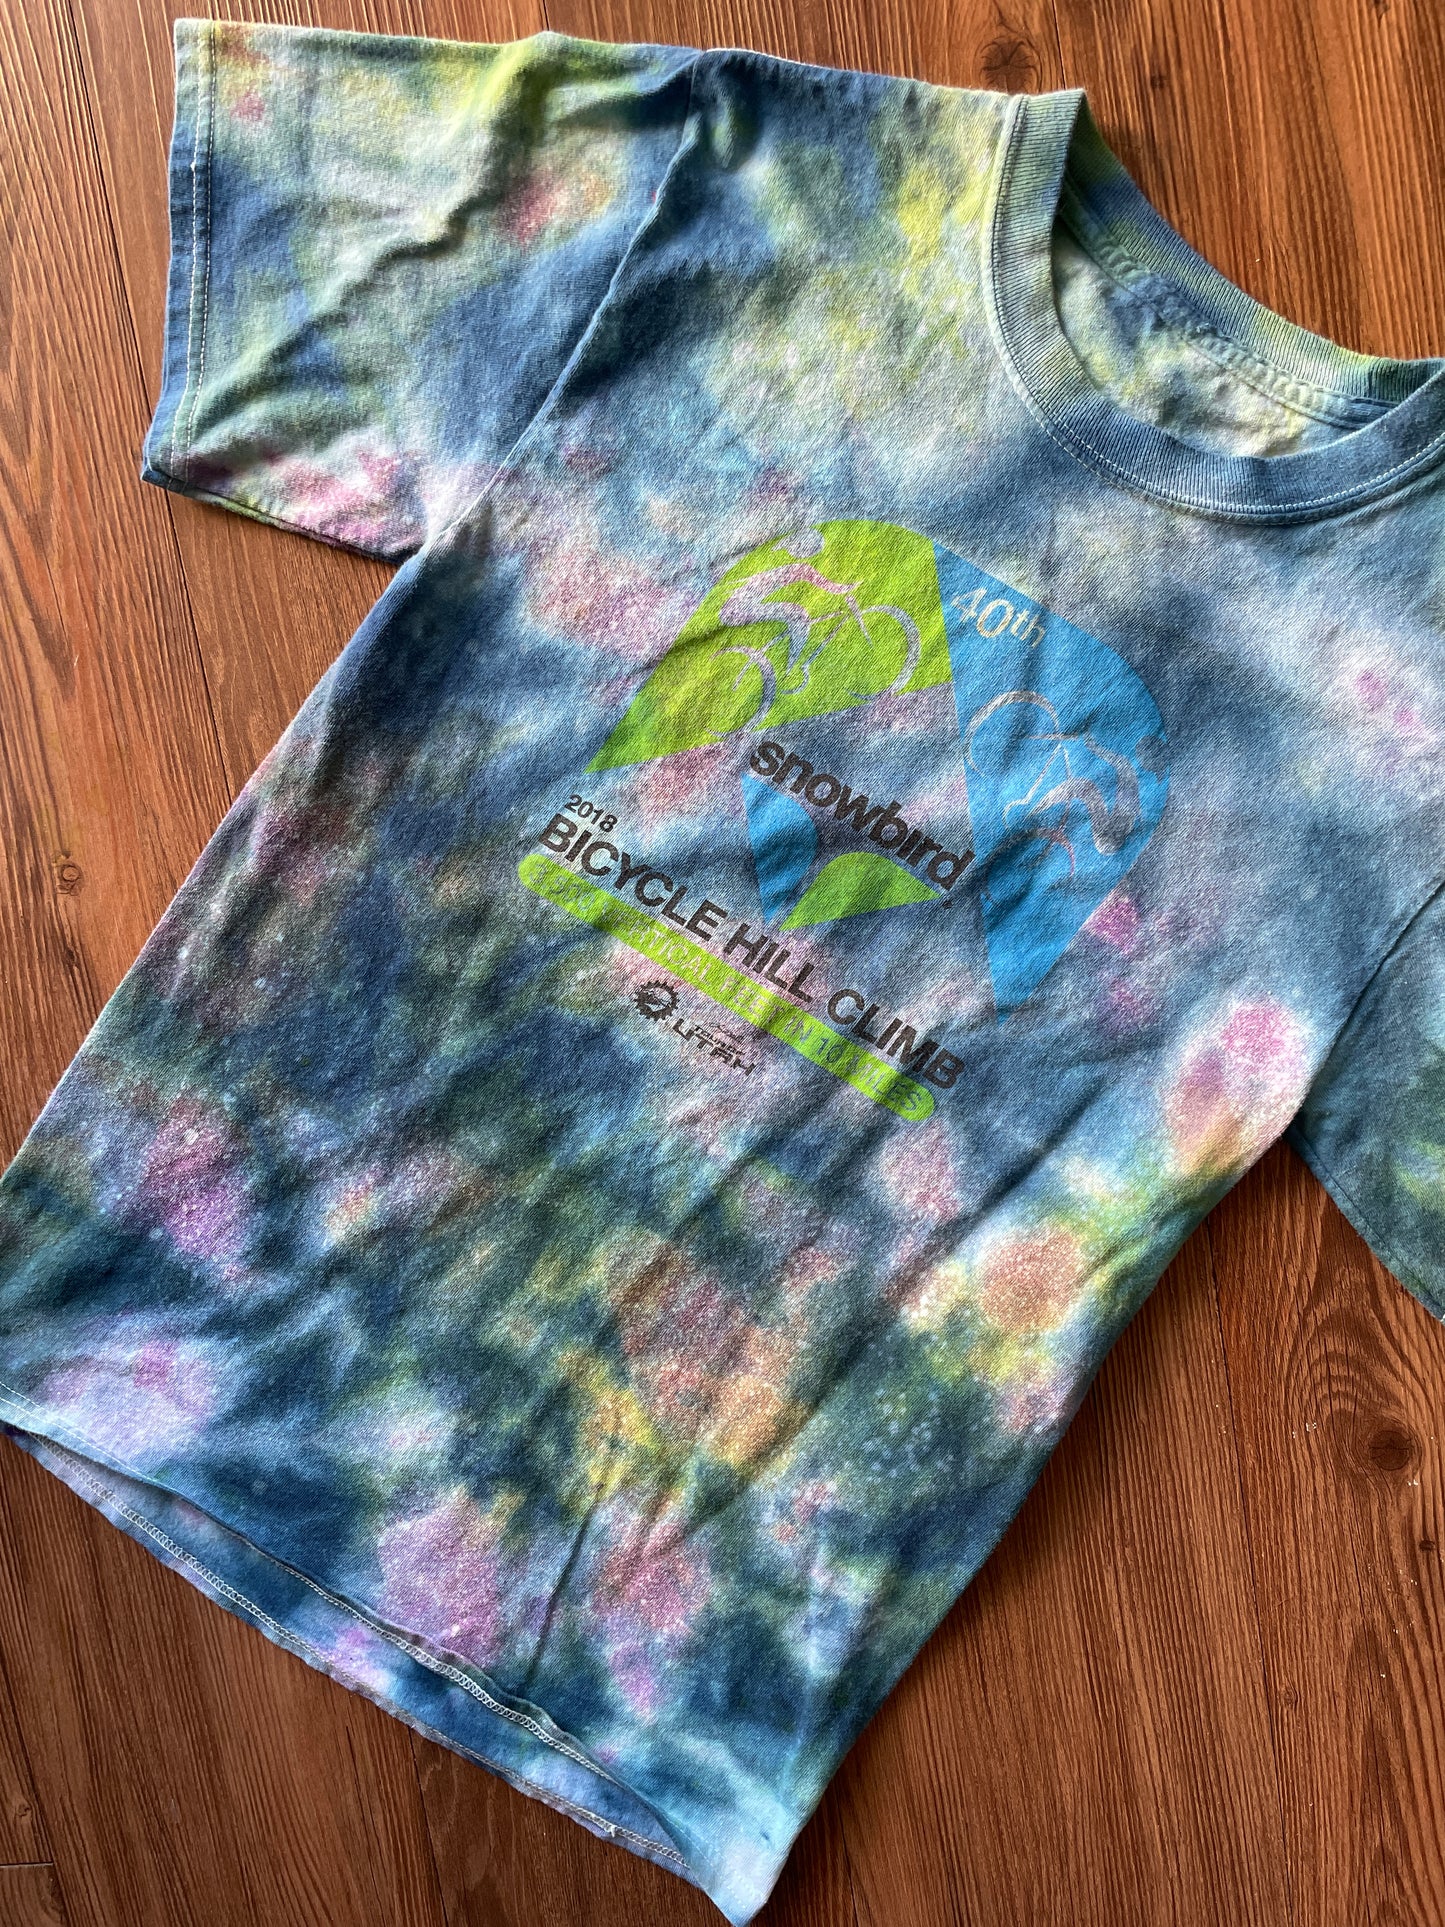 Small Men’s 2018 40th Annual Snowbird Bicycle Hill Climb Galaxy Handmade Tie Dye T-Shirt | One-Of-a-Kind Pastel Blue and Green Short Sleeve